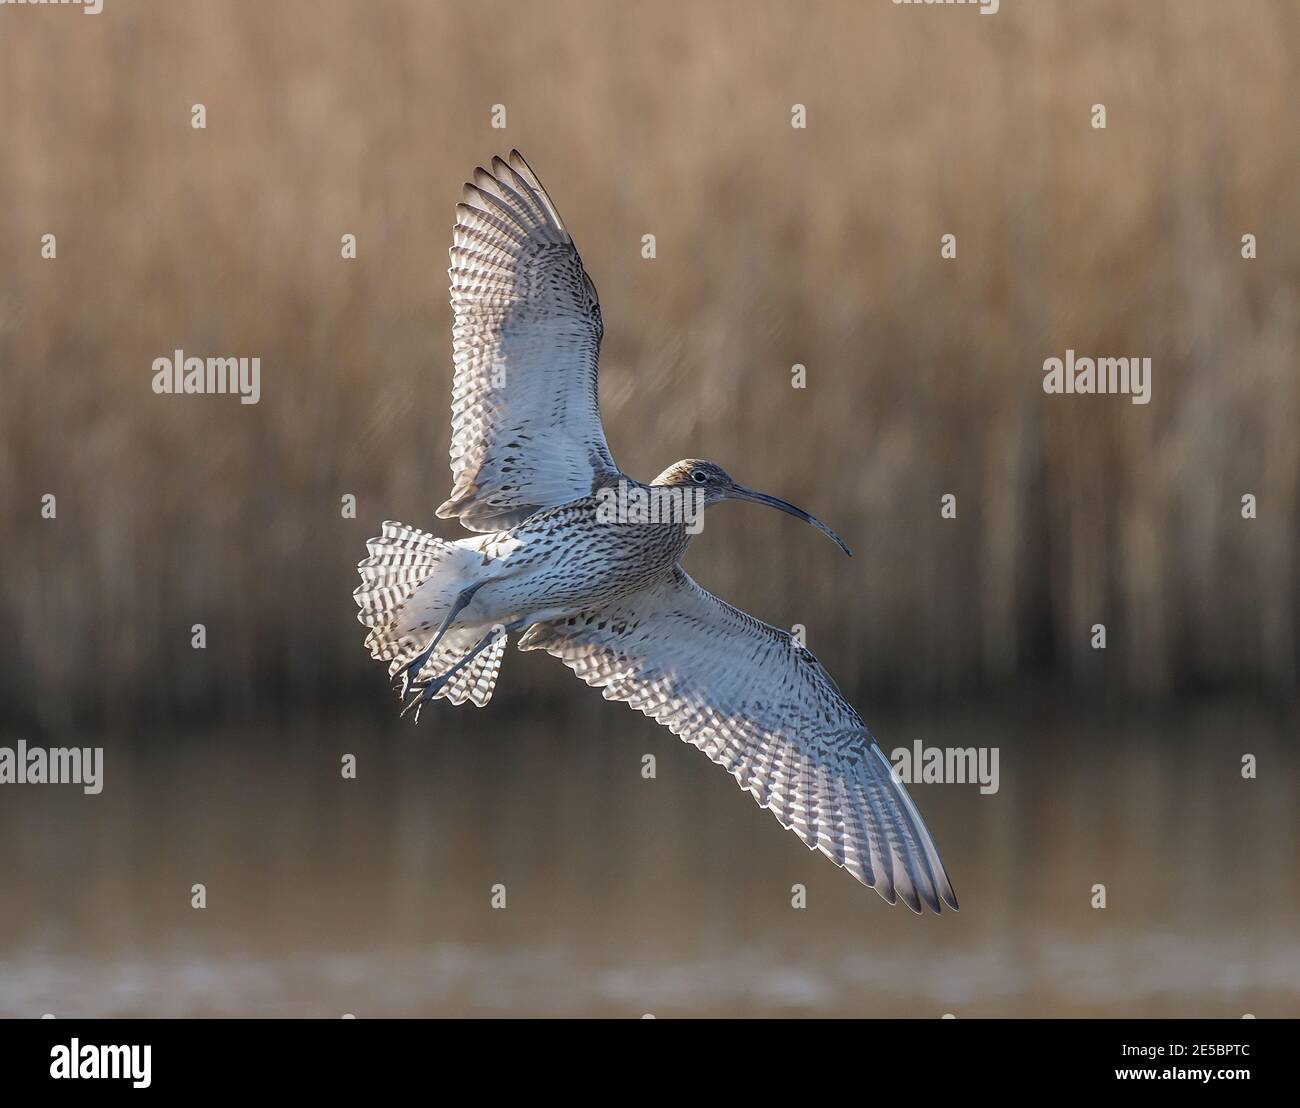 Curlew Landing, Teif Marshes, Wales Stockfoto